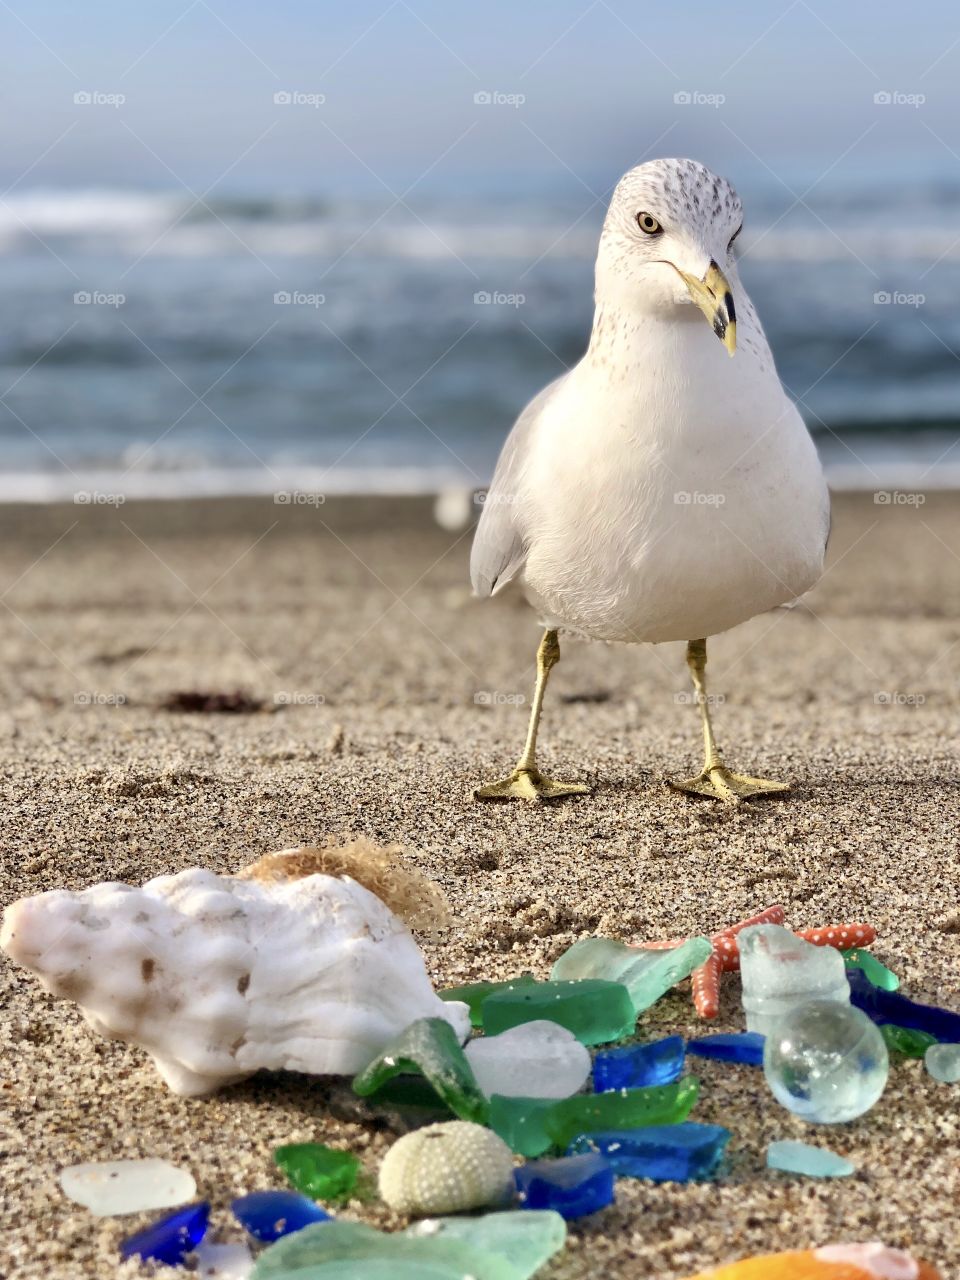 Foap Mission My Favorite Moments! A Close Shot Of A Seagul With Beach Glass!